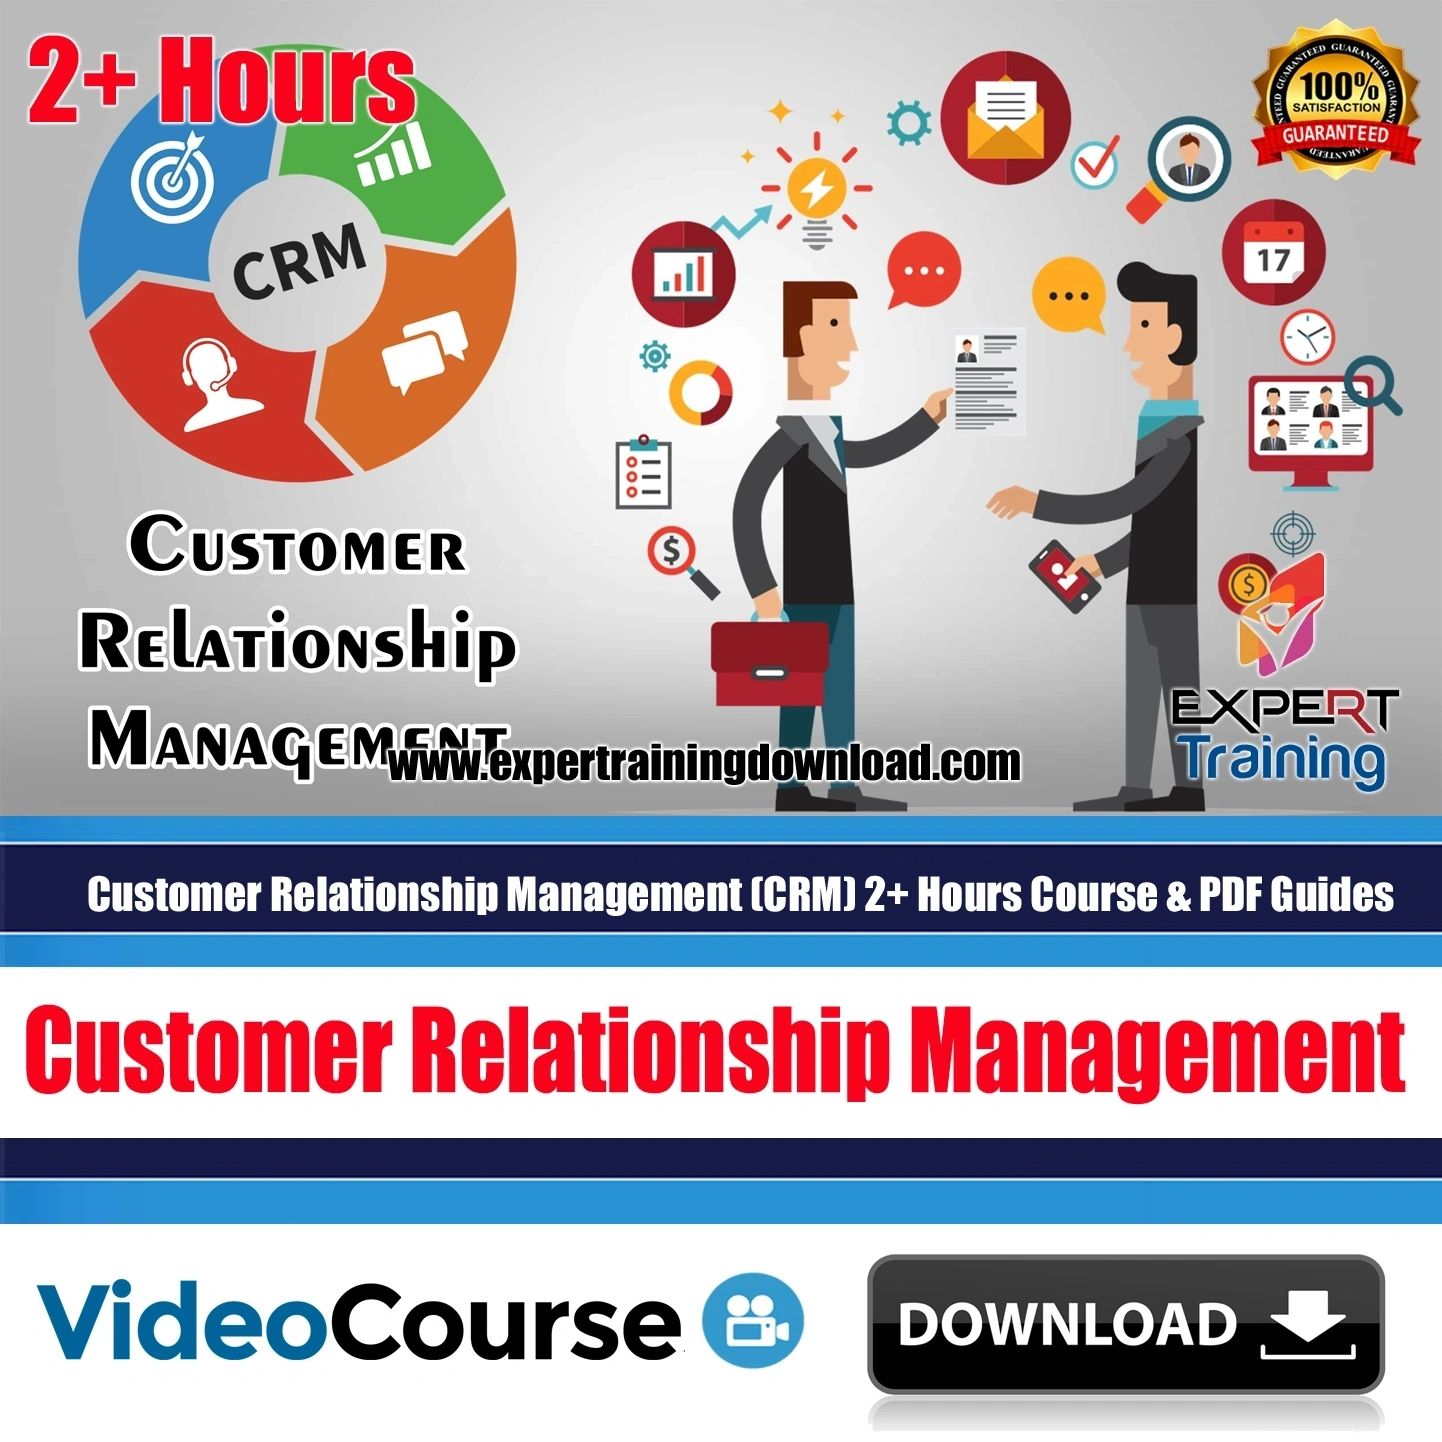 Customer Relationship Management (CRM) Course & PDF Guides